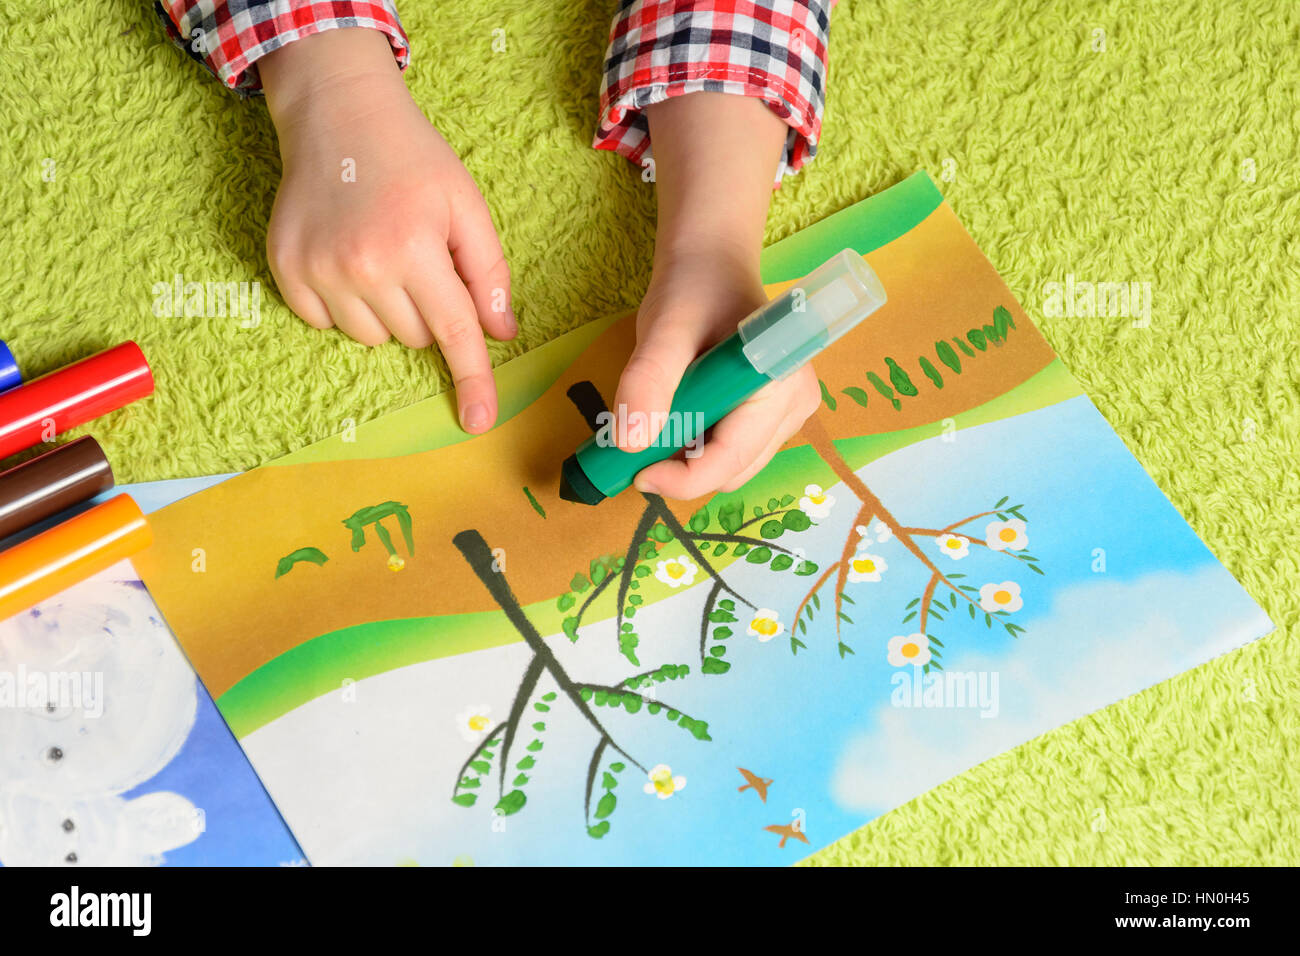 the child draws a picture lying on a green carpet Stock Photo